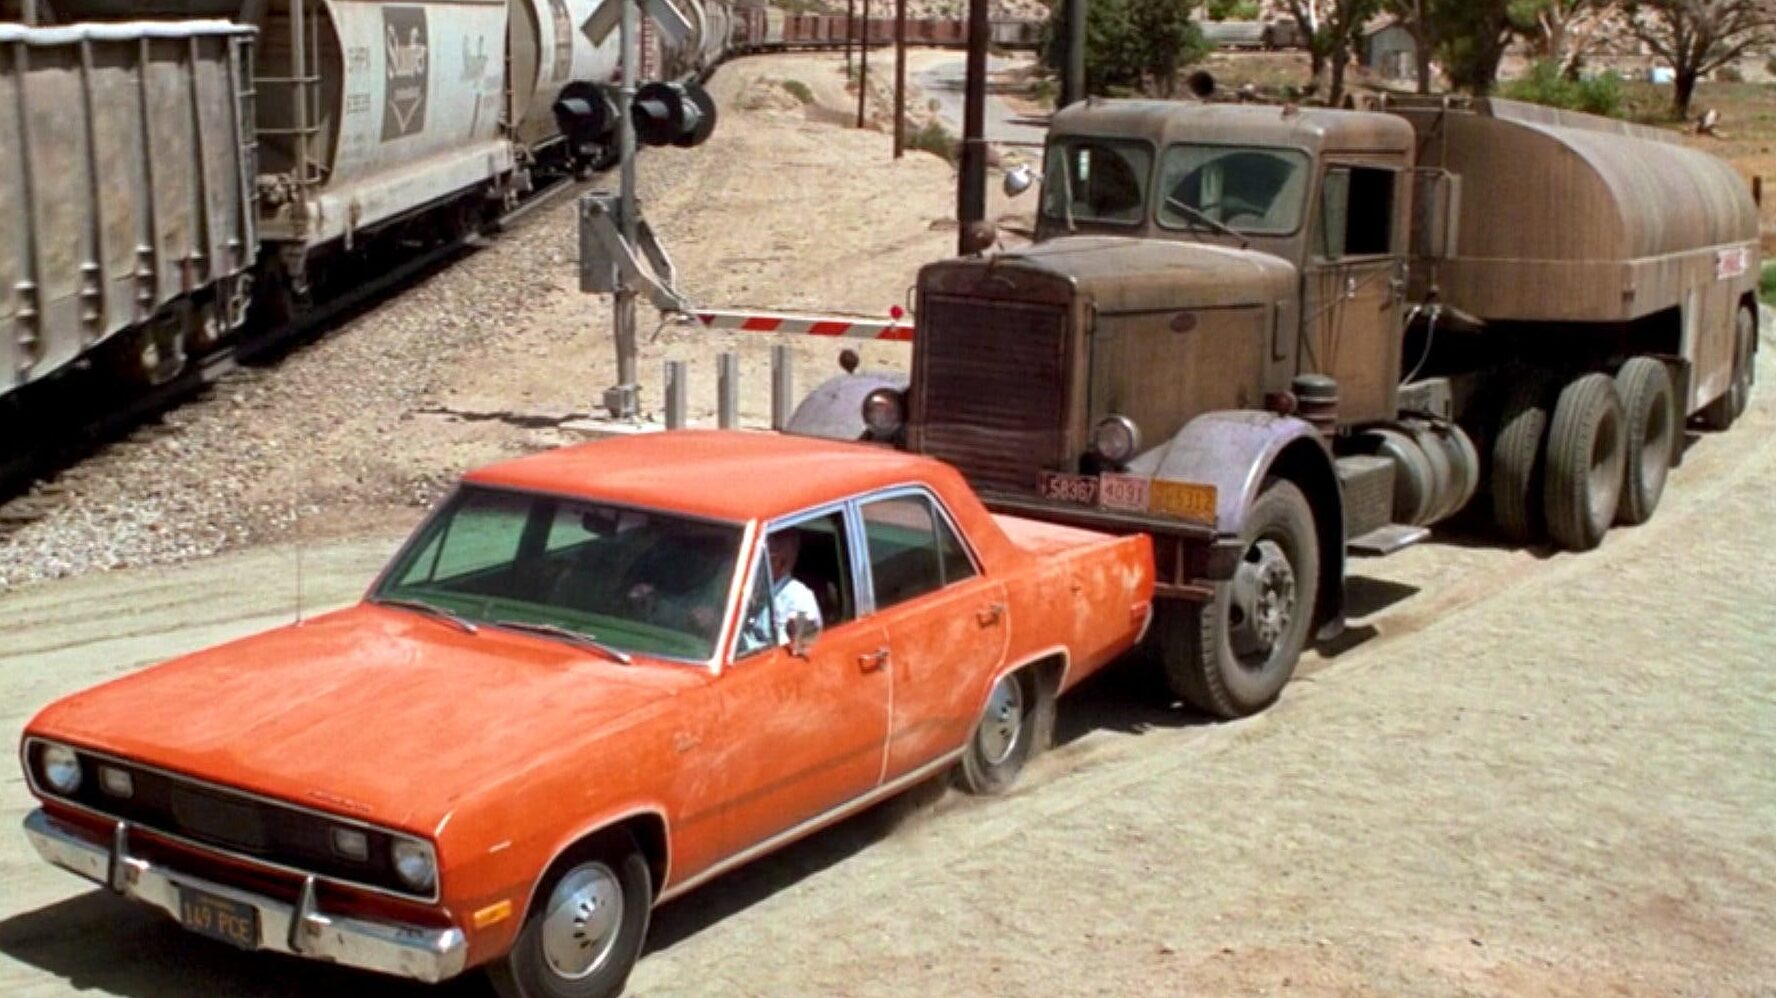 Duel's 50th anniversary: How a movie truck led to a killer shark -  FreightWaves